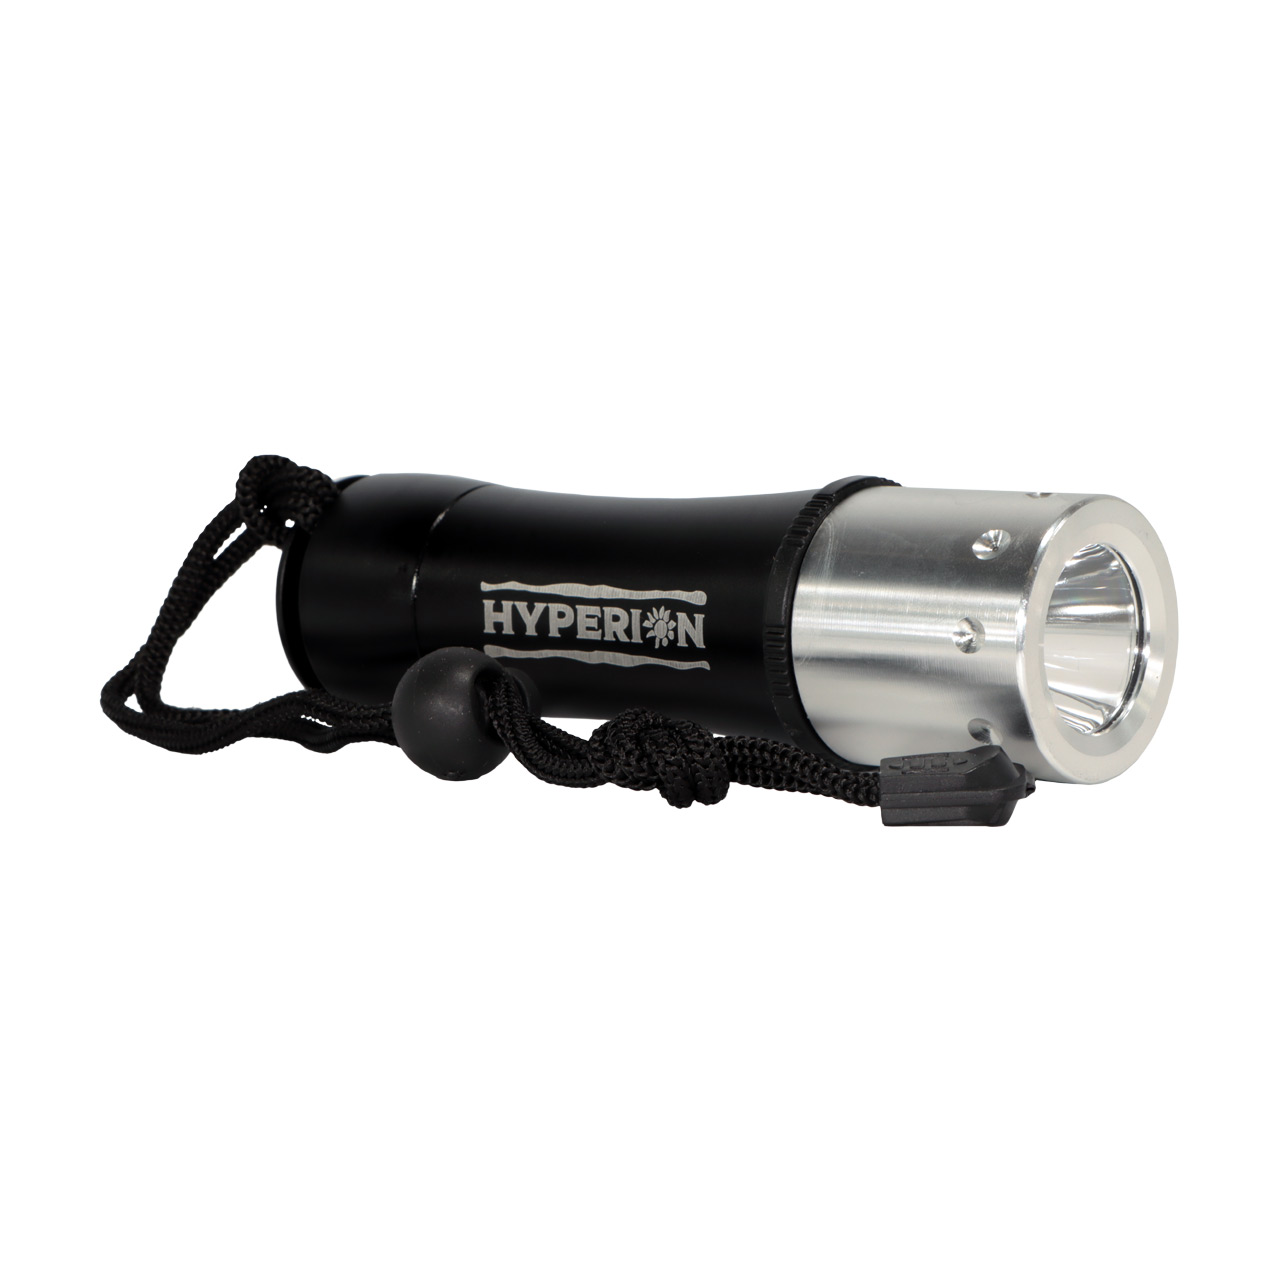 HYPERION FL600 Torch with Battery & Charger